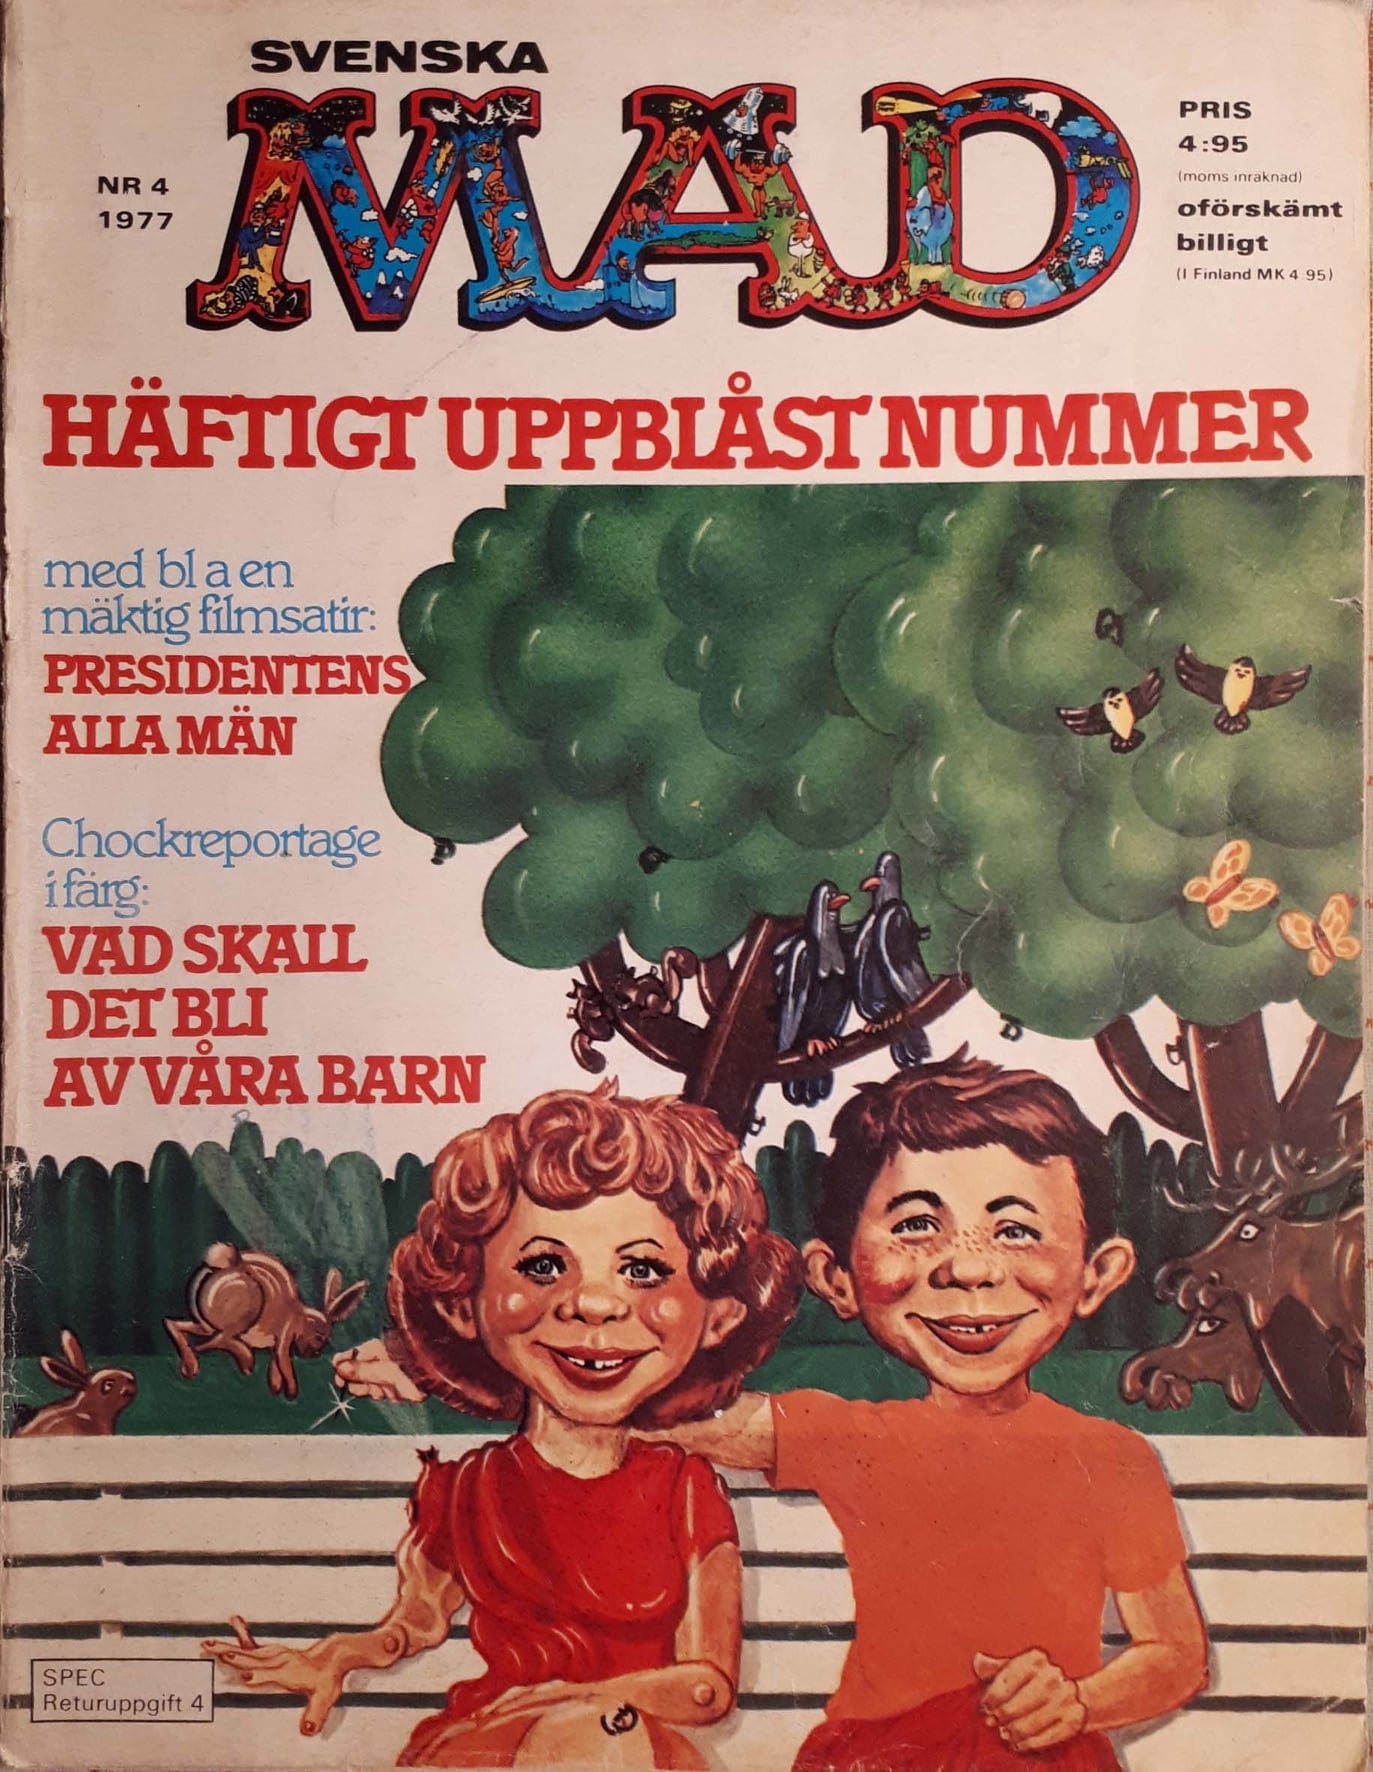 Details about   1979 MAD MAGAZINE Swedish Mad CRUISE DIPLOMA CERTIFICATE trip souvenir insert 